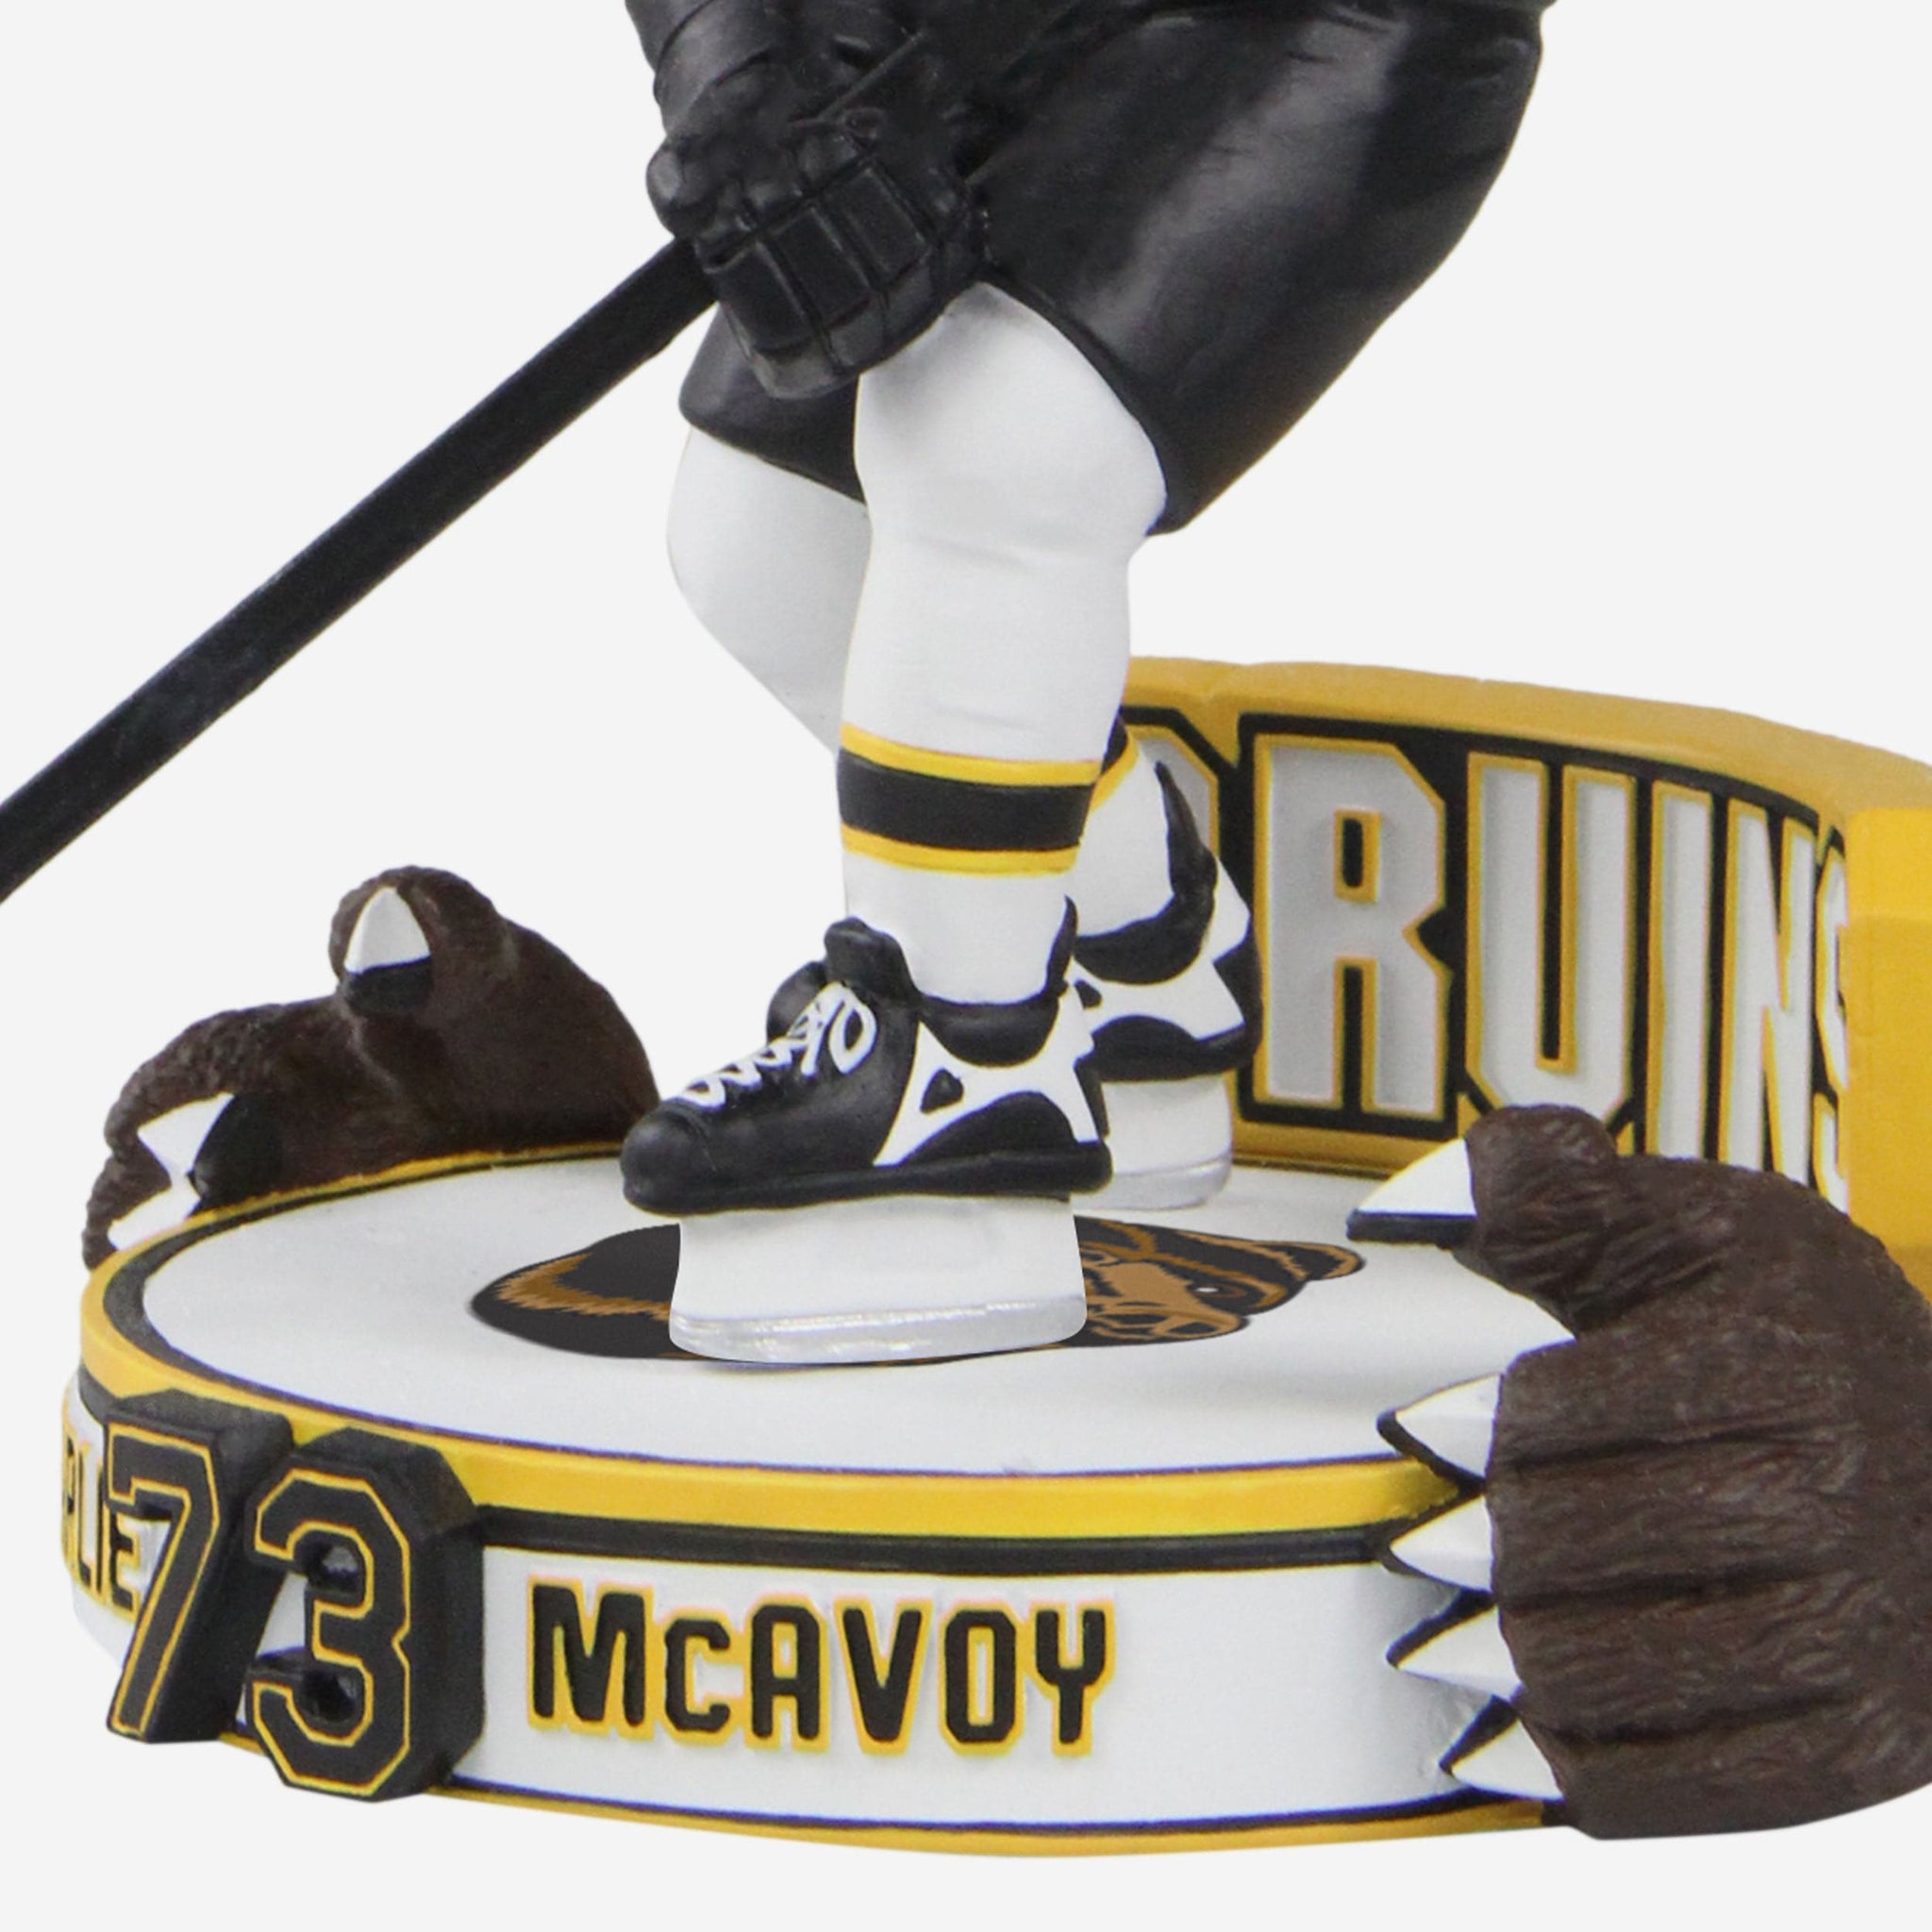 How to buy Boston Bruins reverse retro gear the players wore at